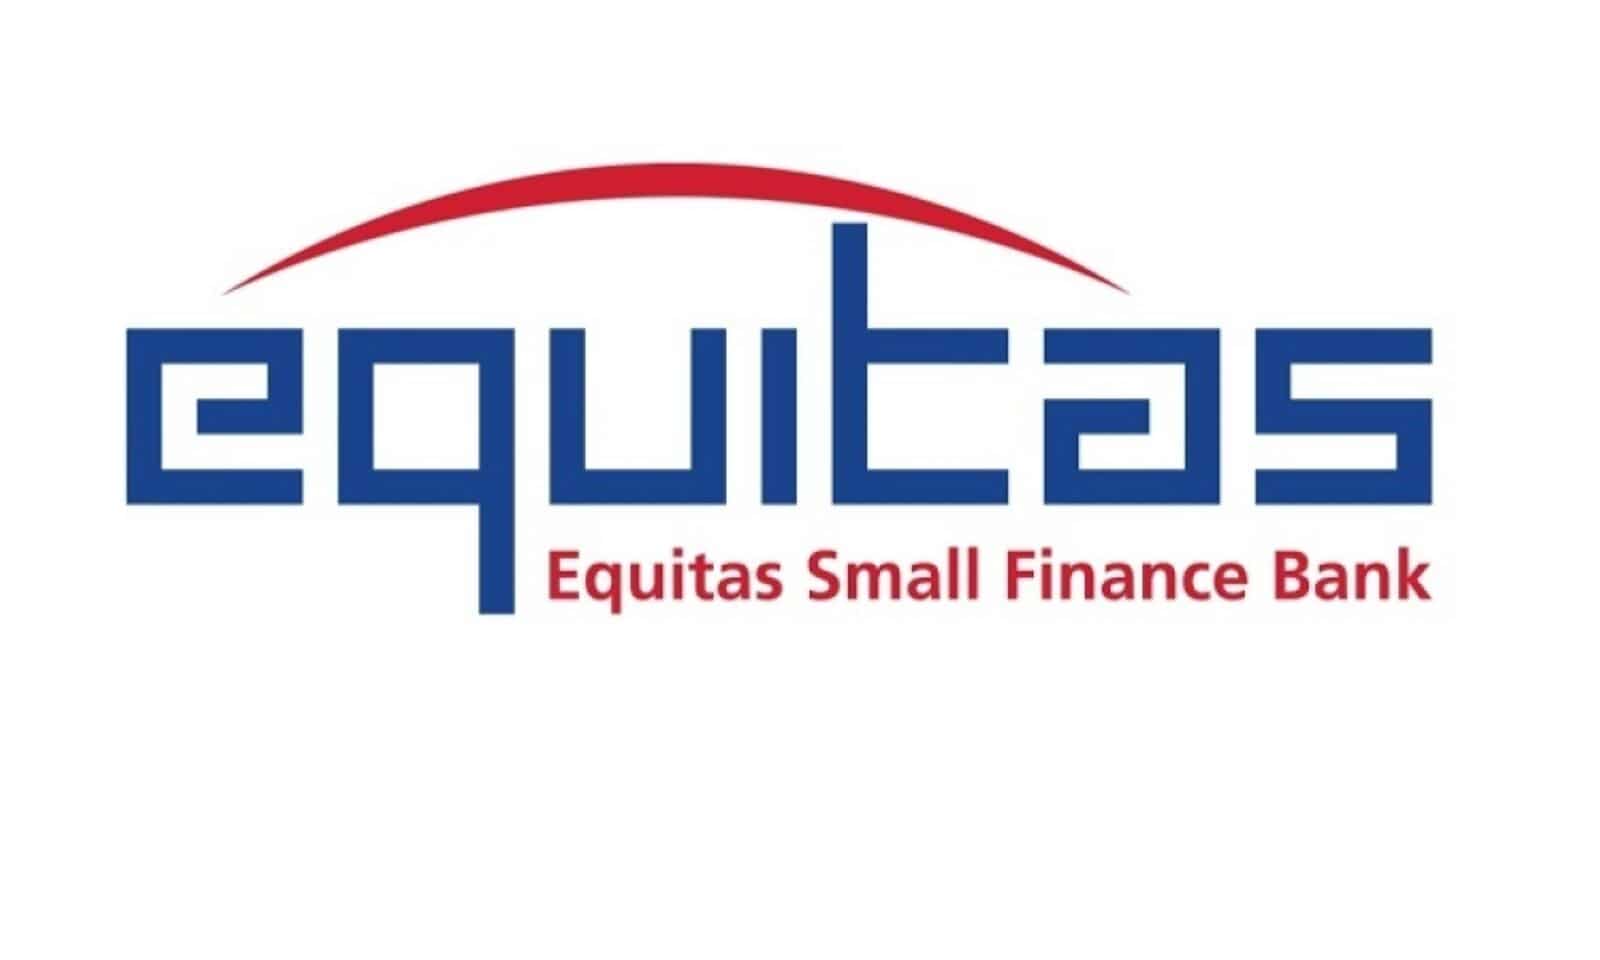 Equitas Small Finance Bank: Brokerages see over 50% upside in stock amid multiple triggers | Zee Business